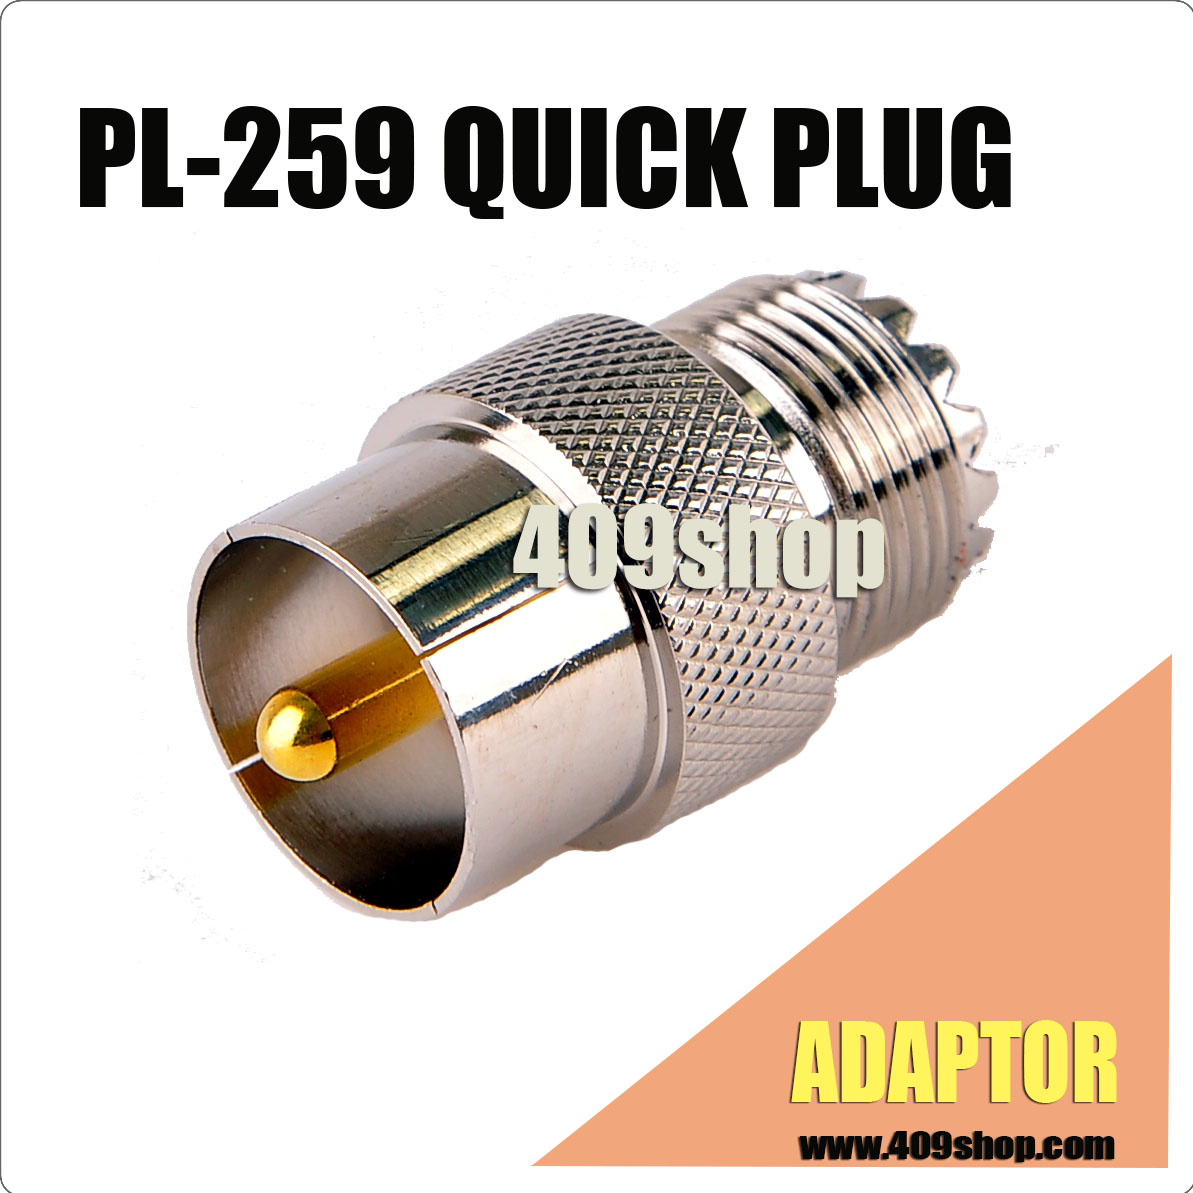 PL-259 UHF Female to Female Coax Cable Barrel Adapter Connector PL259 Coupler Plug for CB HAM Radio Antenna Ancable 2-Pack SO-239 SWR Meter 